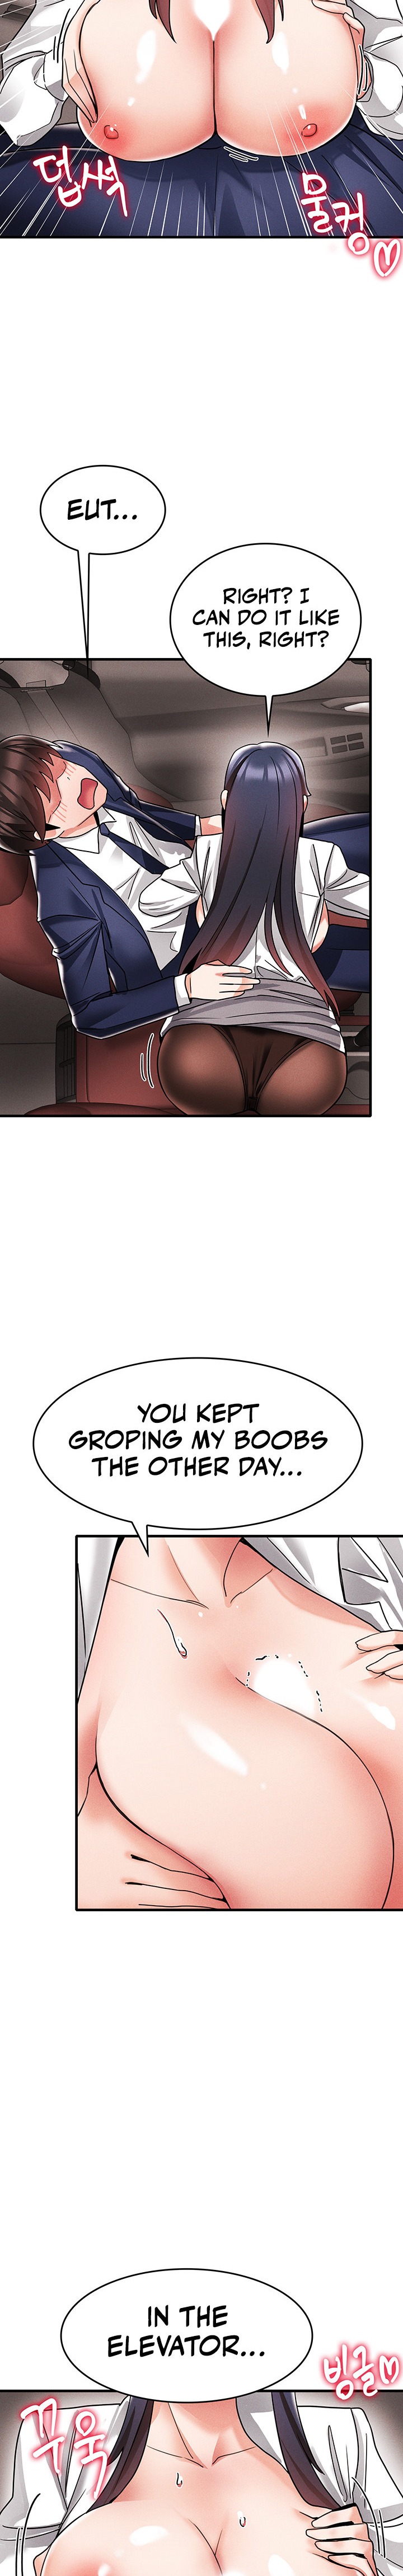 Relationship Reverse Button: Let’s Make Her Submissive - Chapter 8 Page 8